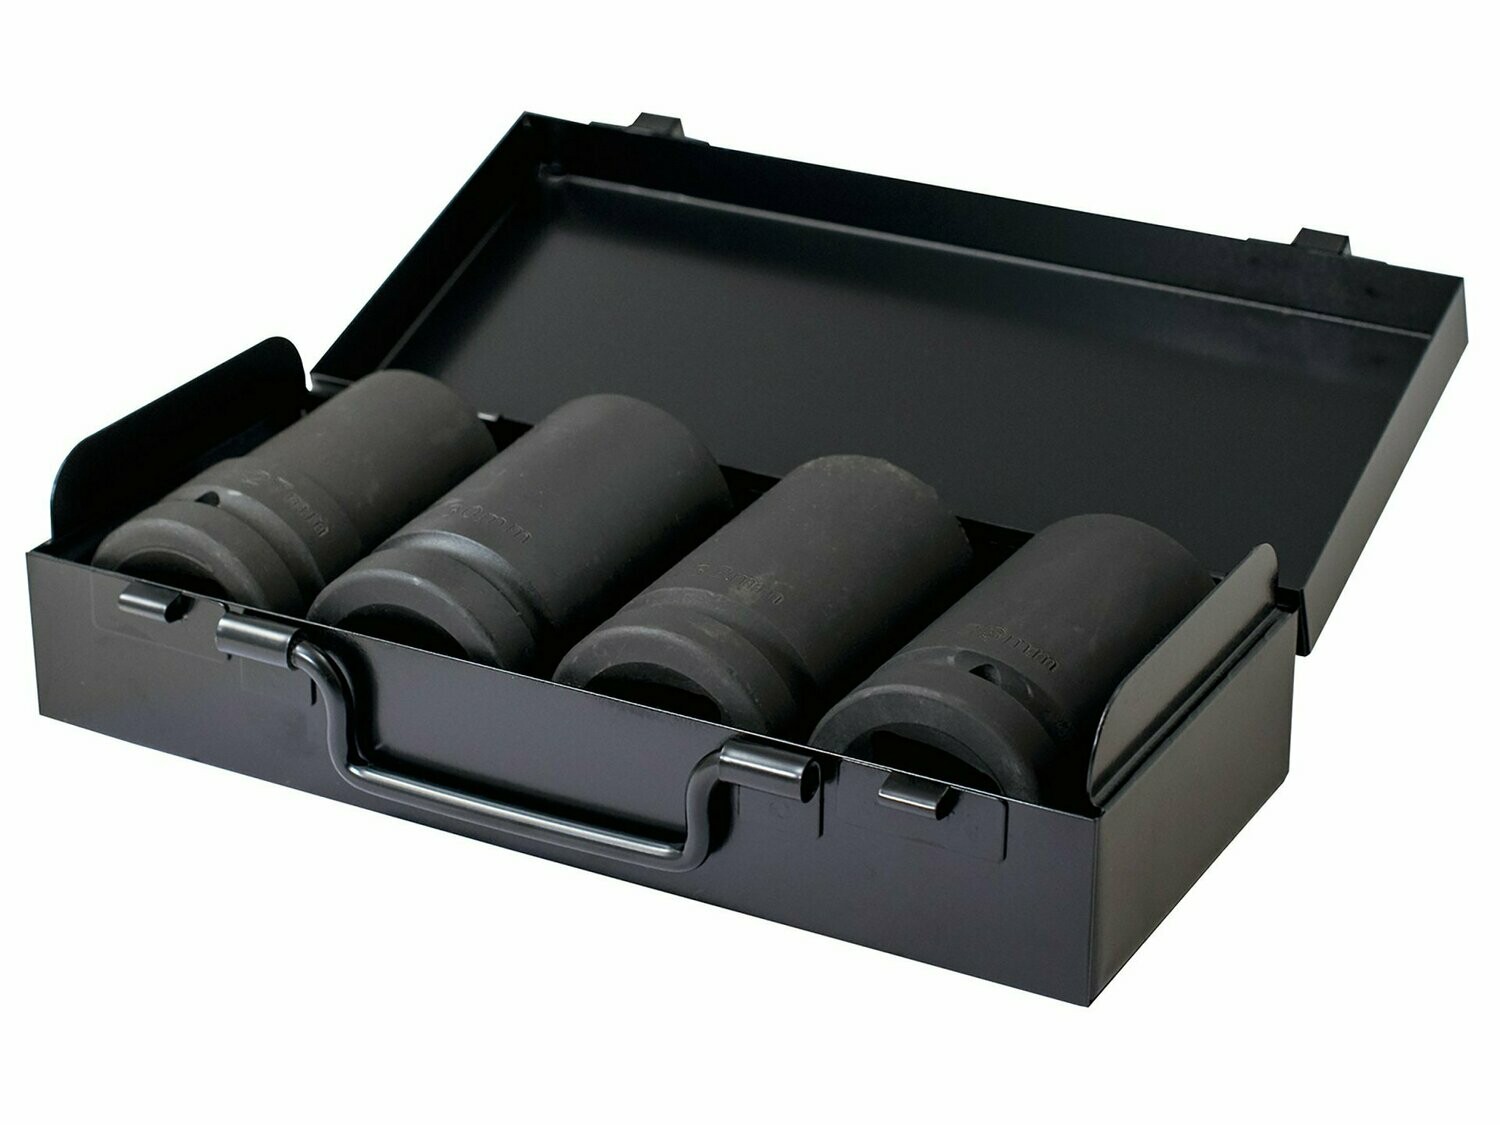 4pc 1" Deep Drive CR-MO Impact Socket Set 27,32,33,36mm
FREE COURIER DELIVERY